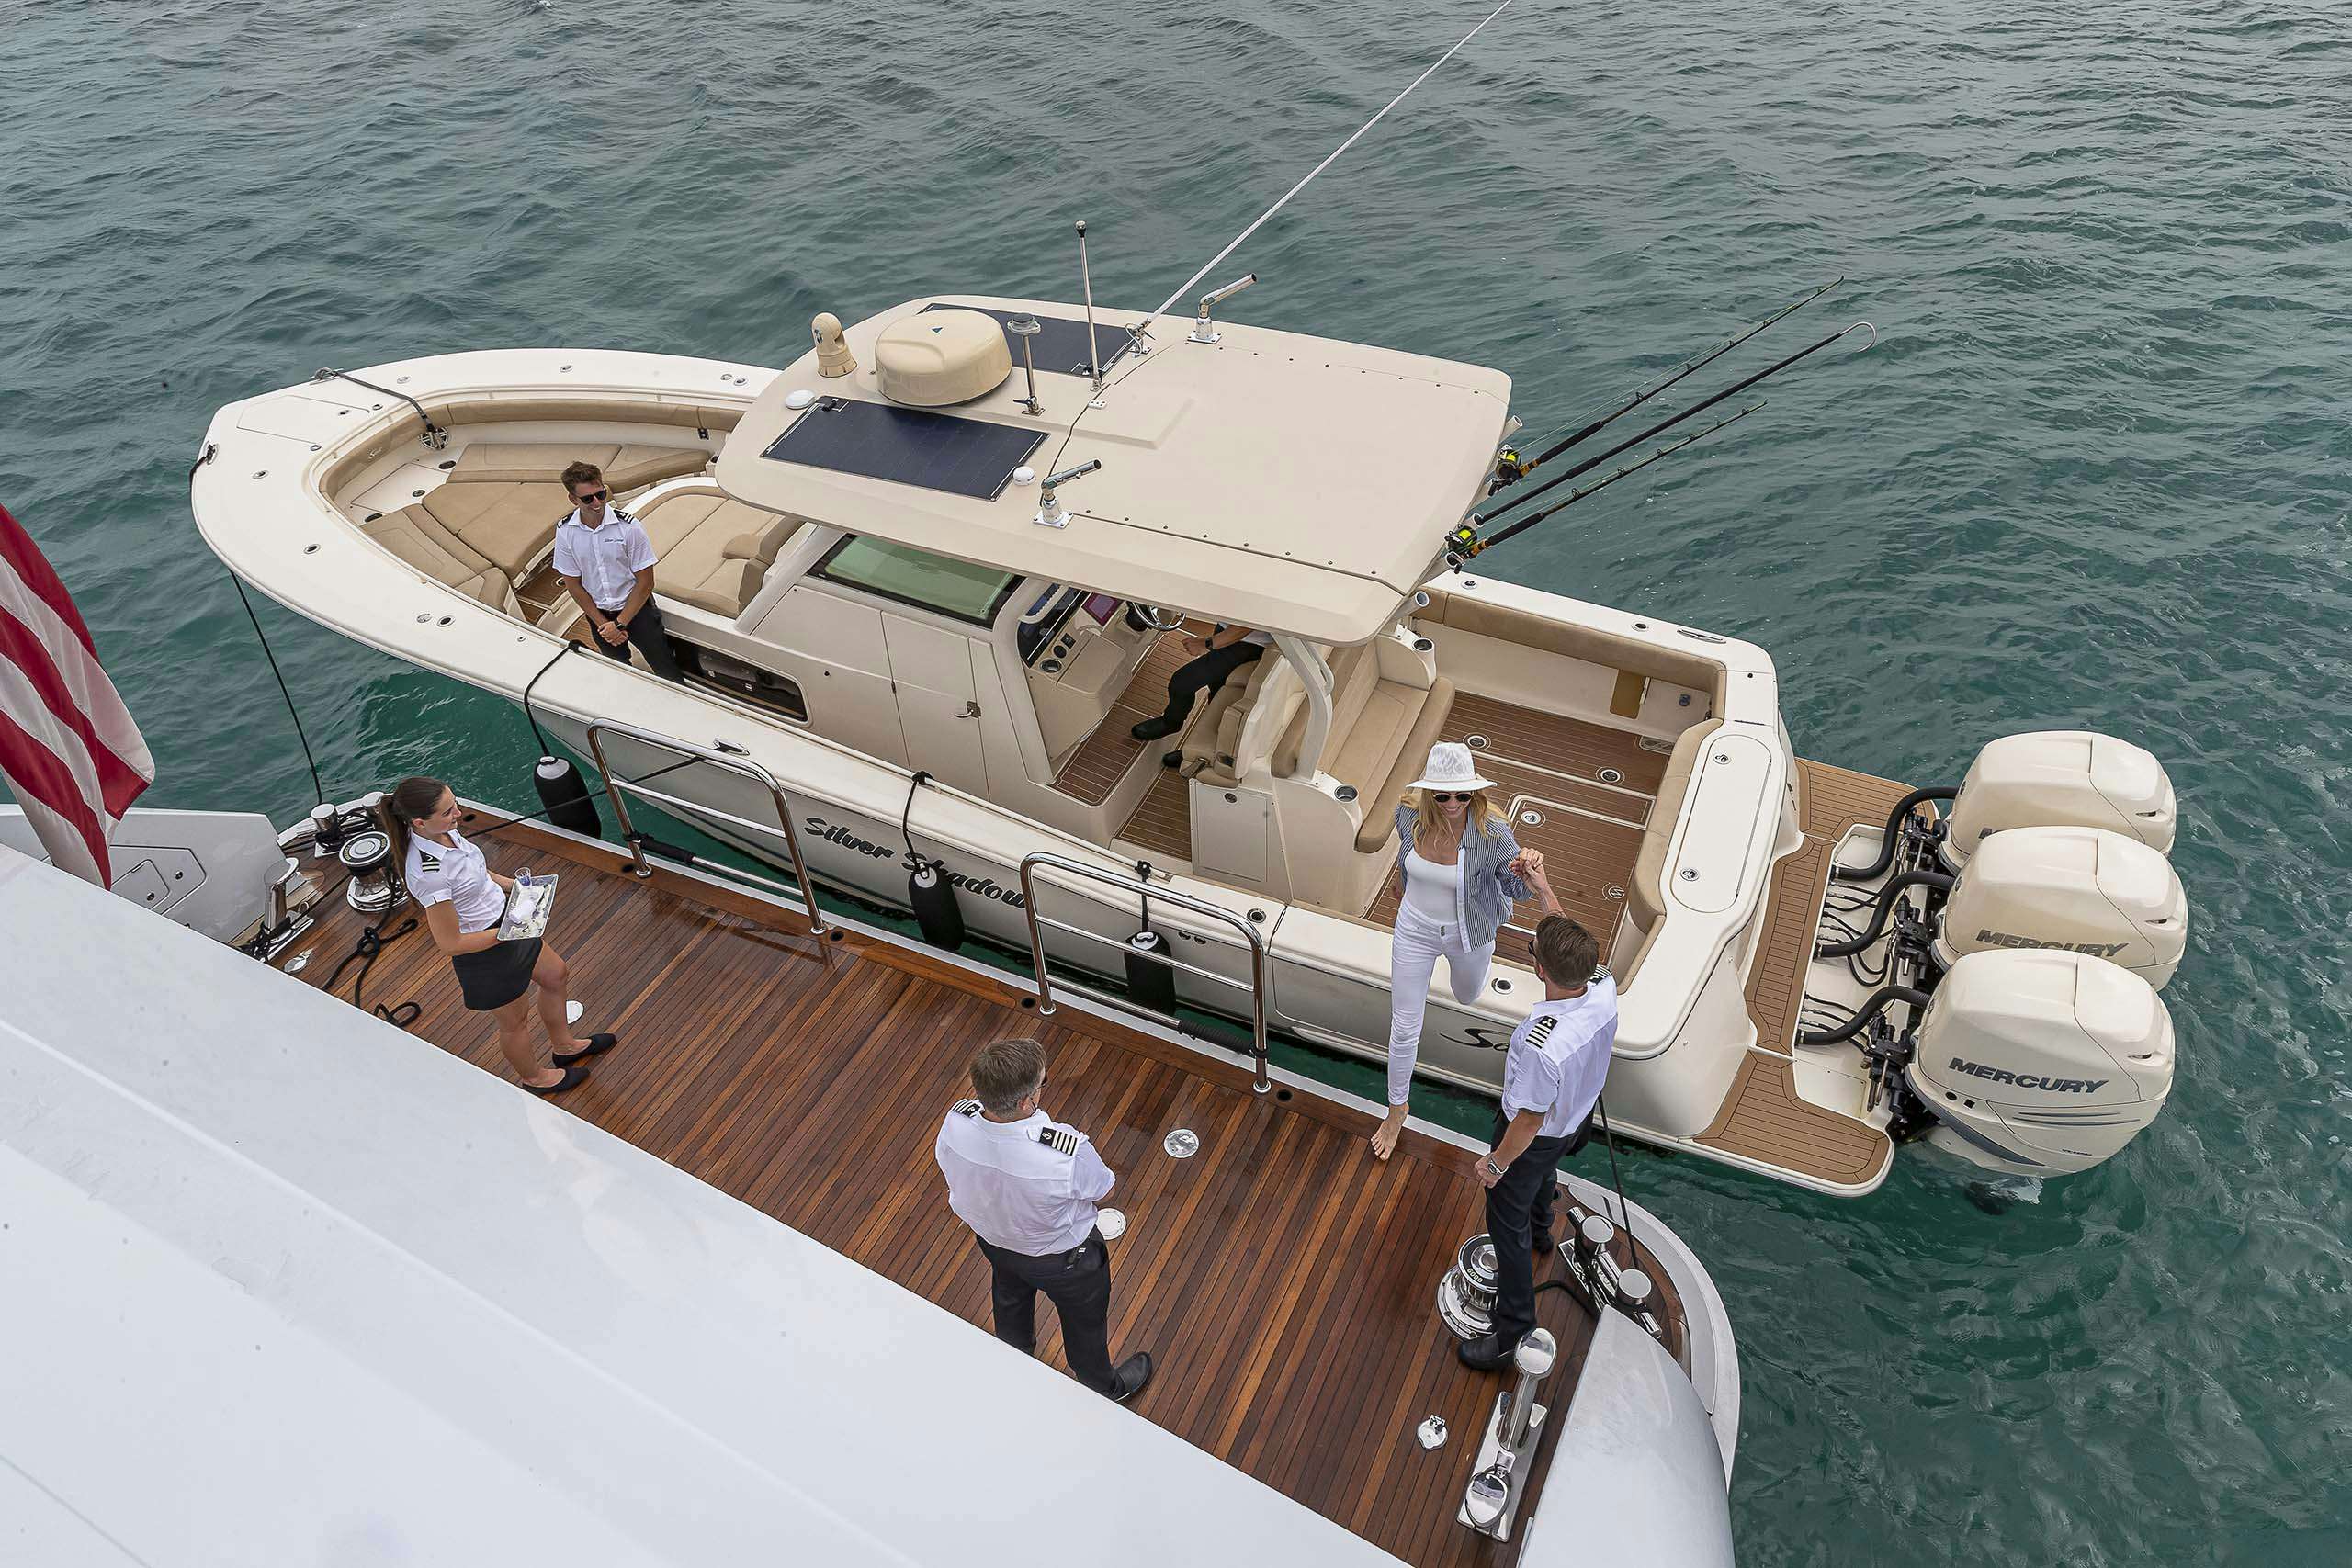 Yacht for Charter with Fishing Equipment, Rent a superyacht with fishing